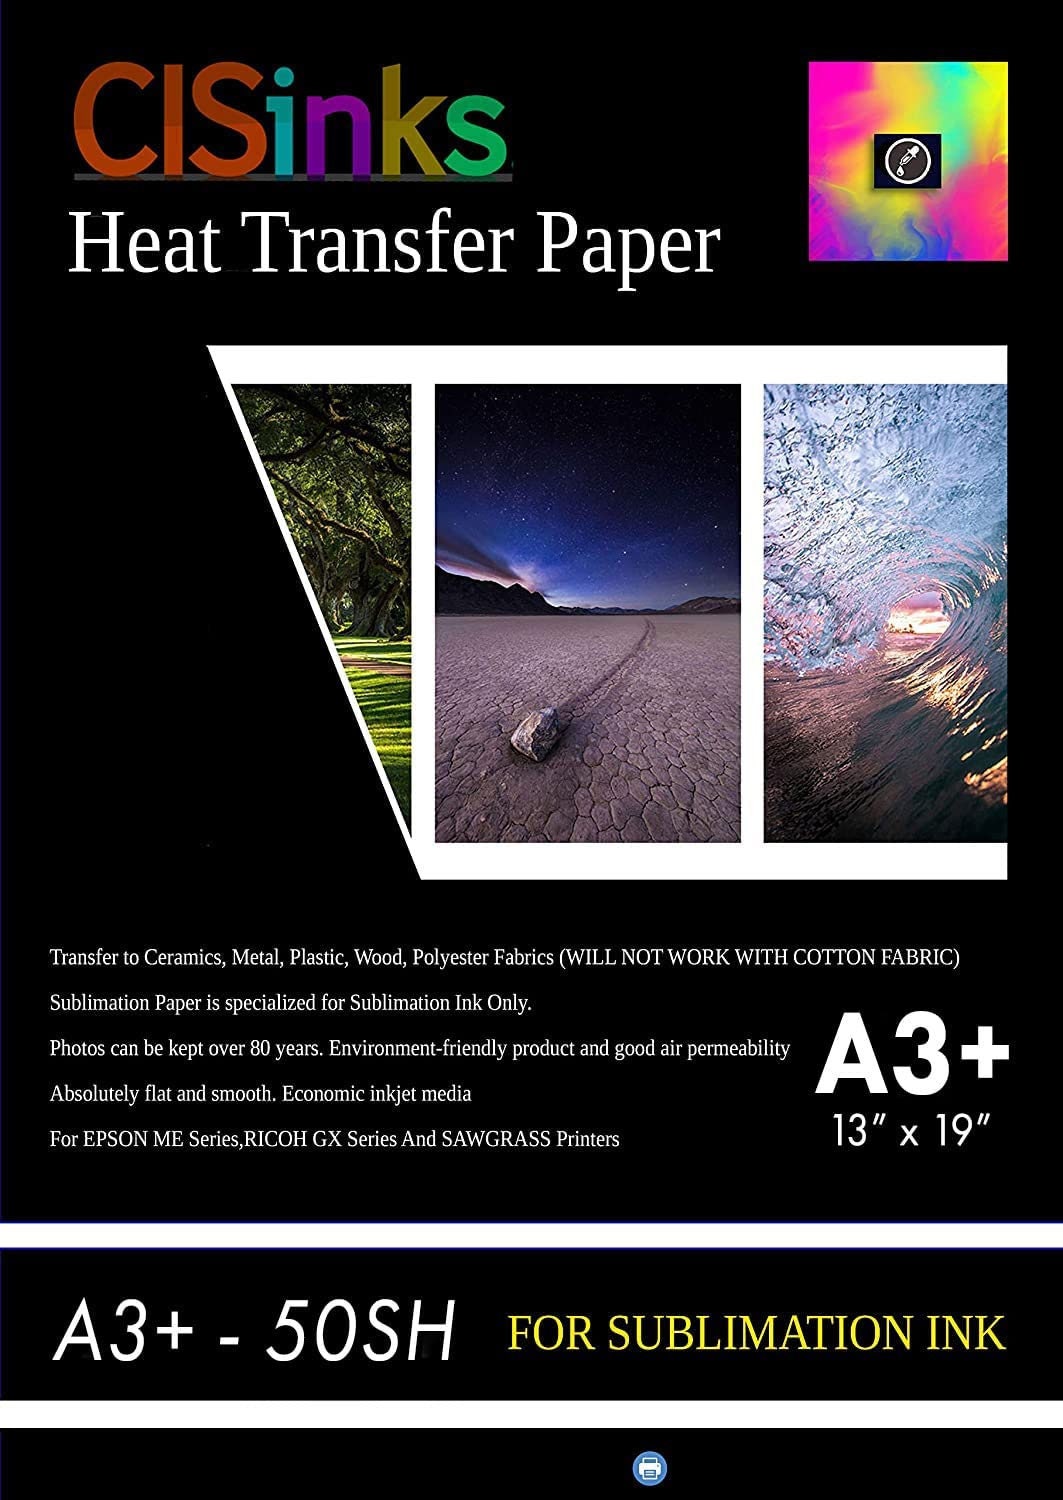 MECOLOUR Sublimation Paper -150 Sheets 120gsm 8.5” x 11”Heat Transfer Paper  Work with Sublimation Ink and Epson HP Canon Sawgrass Inkjet Printers for